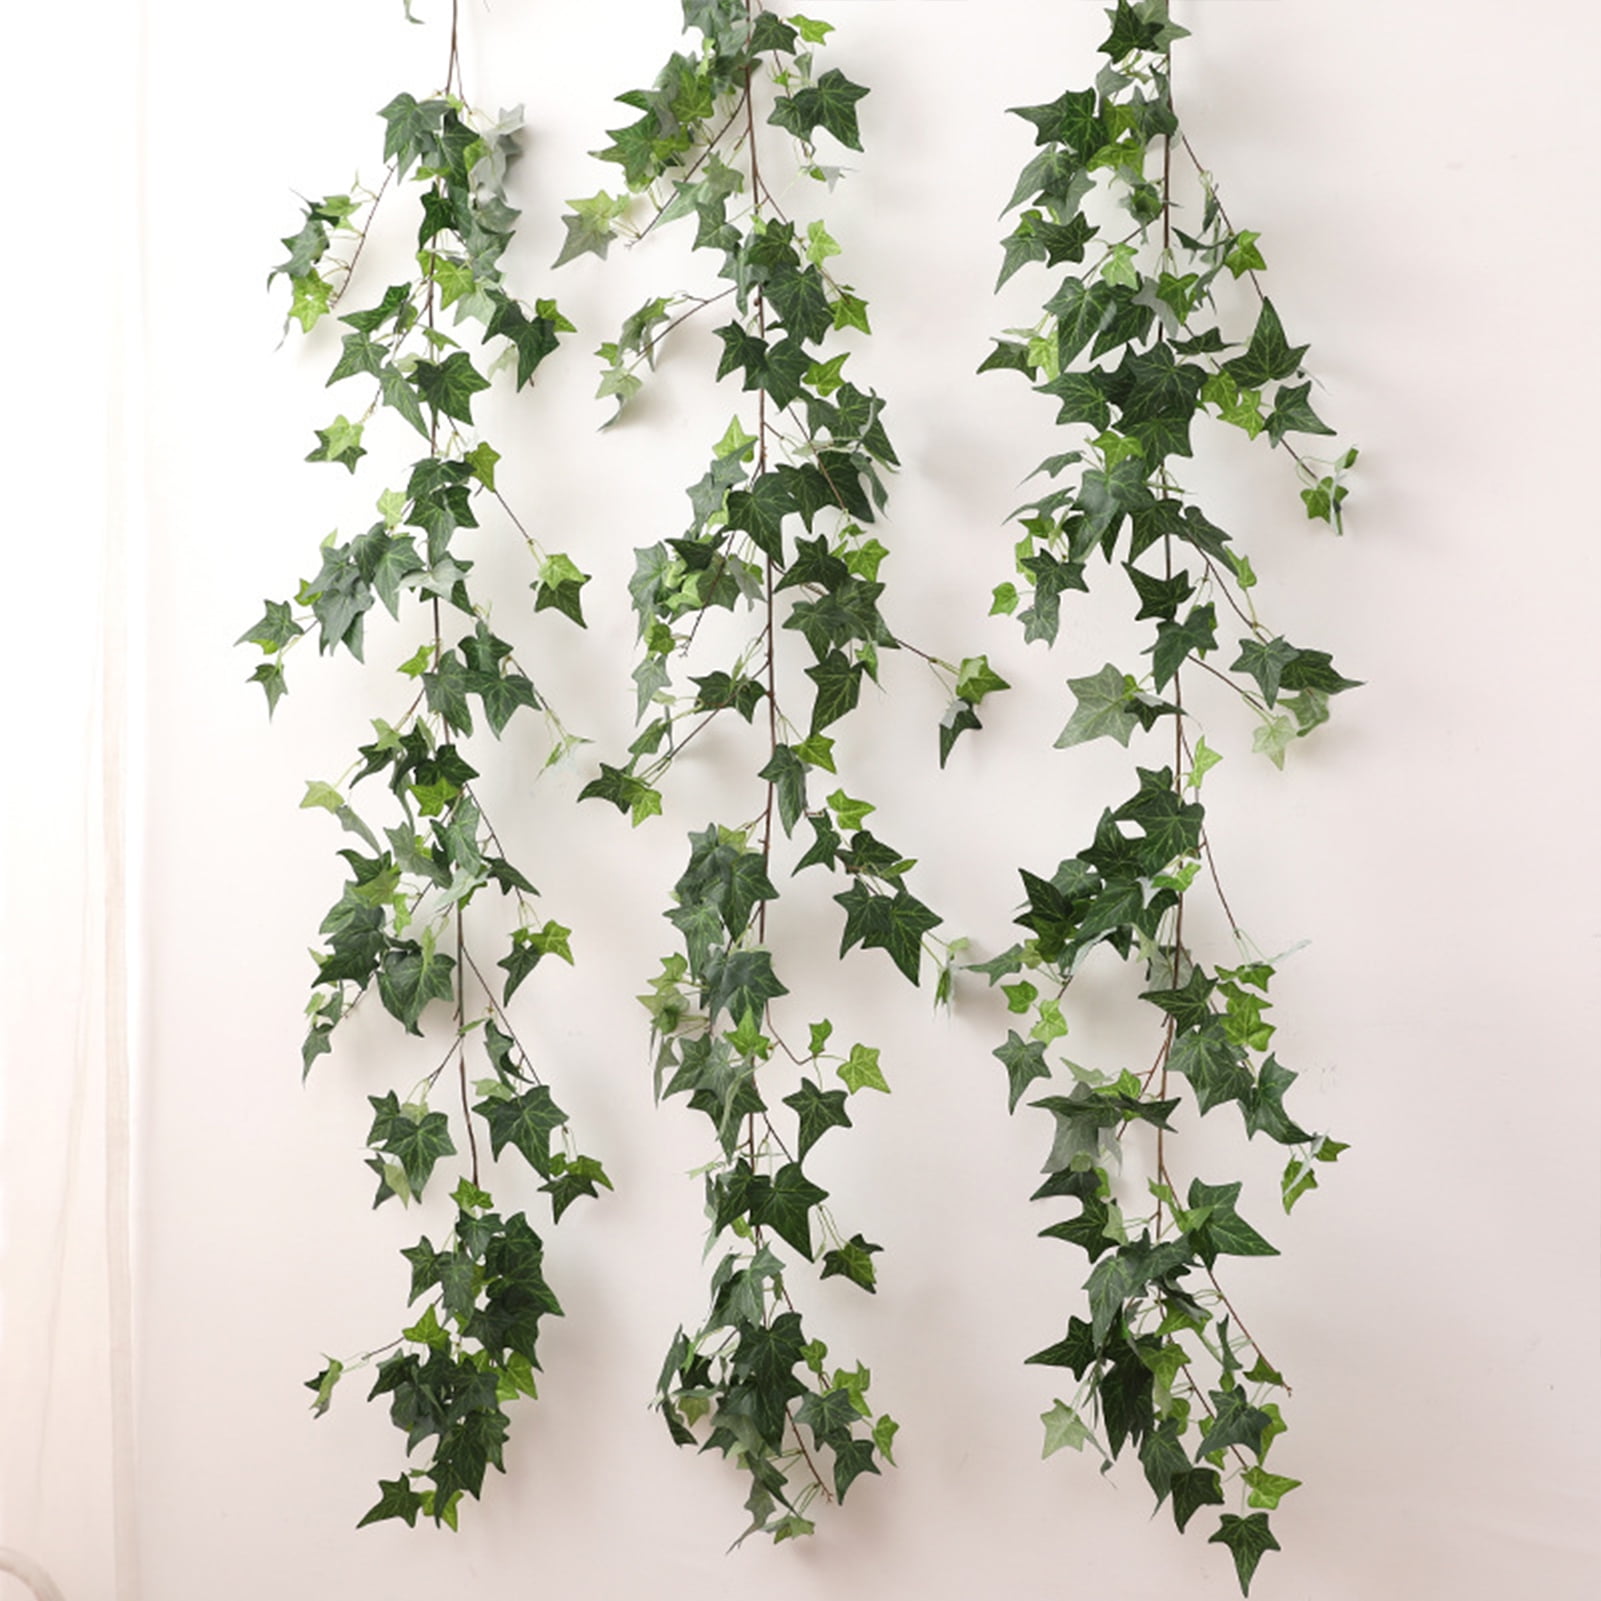 ArtiFleur Artificial Hanging Ivy Garland Life Like Begonia Leaves, Decorative  Vines For Home & Event Décor. From Laoku, $11.19